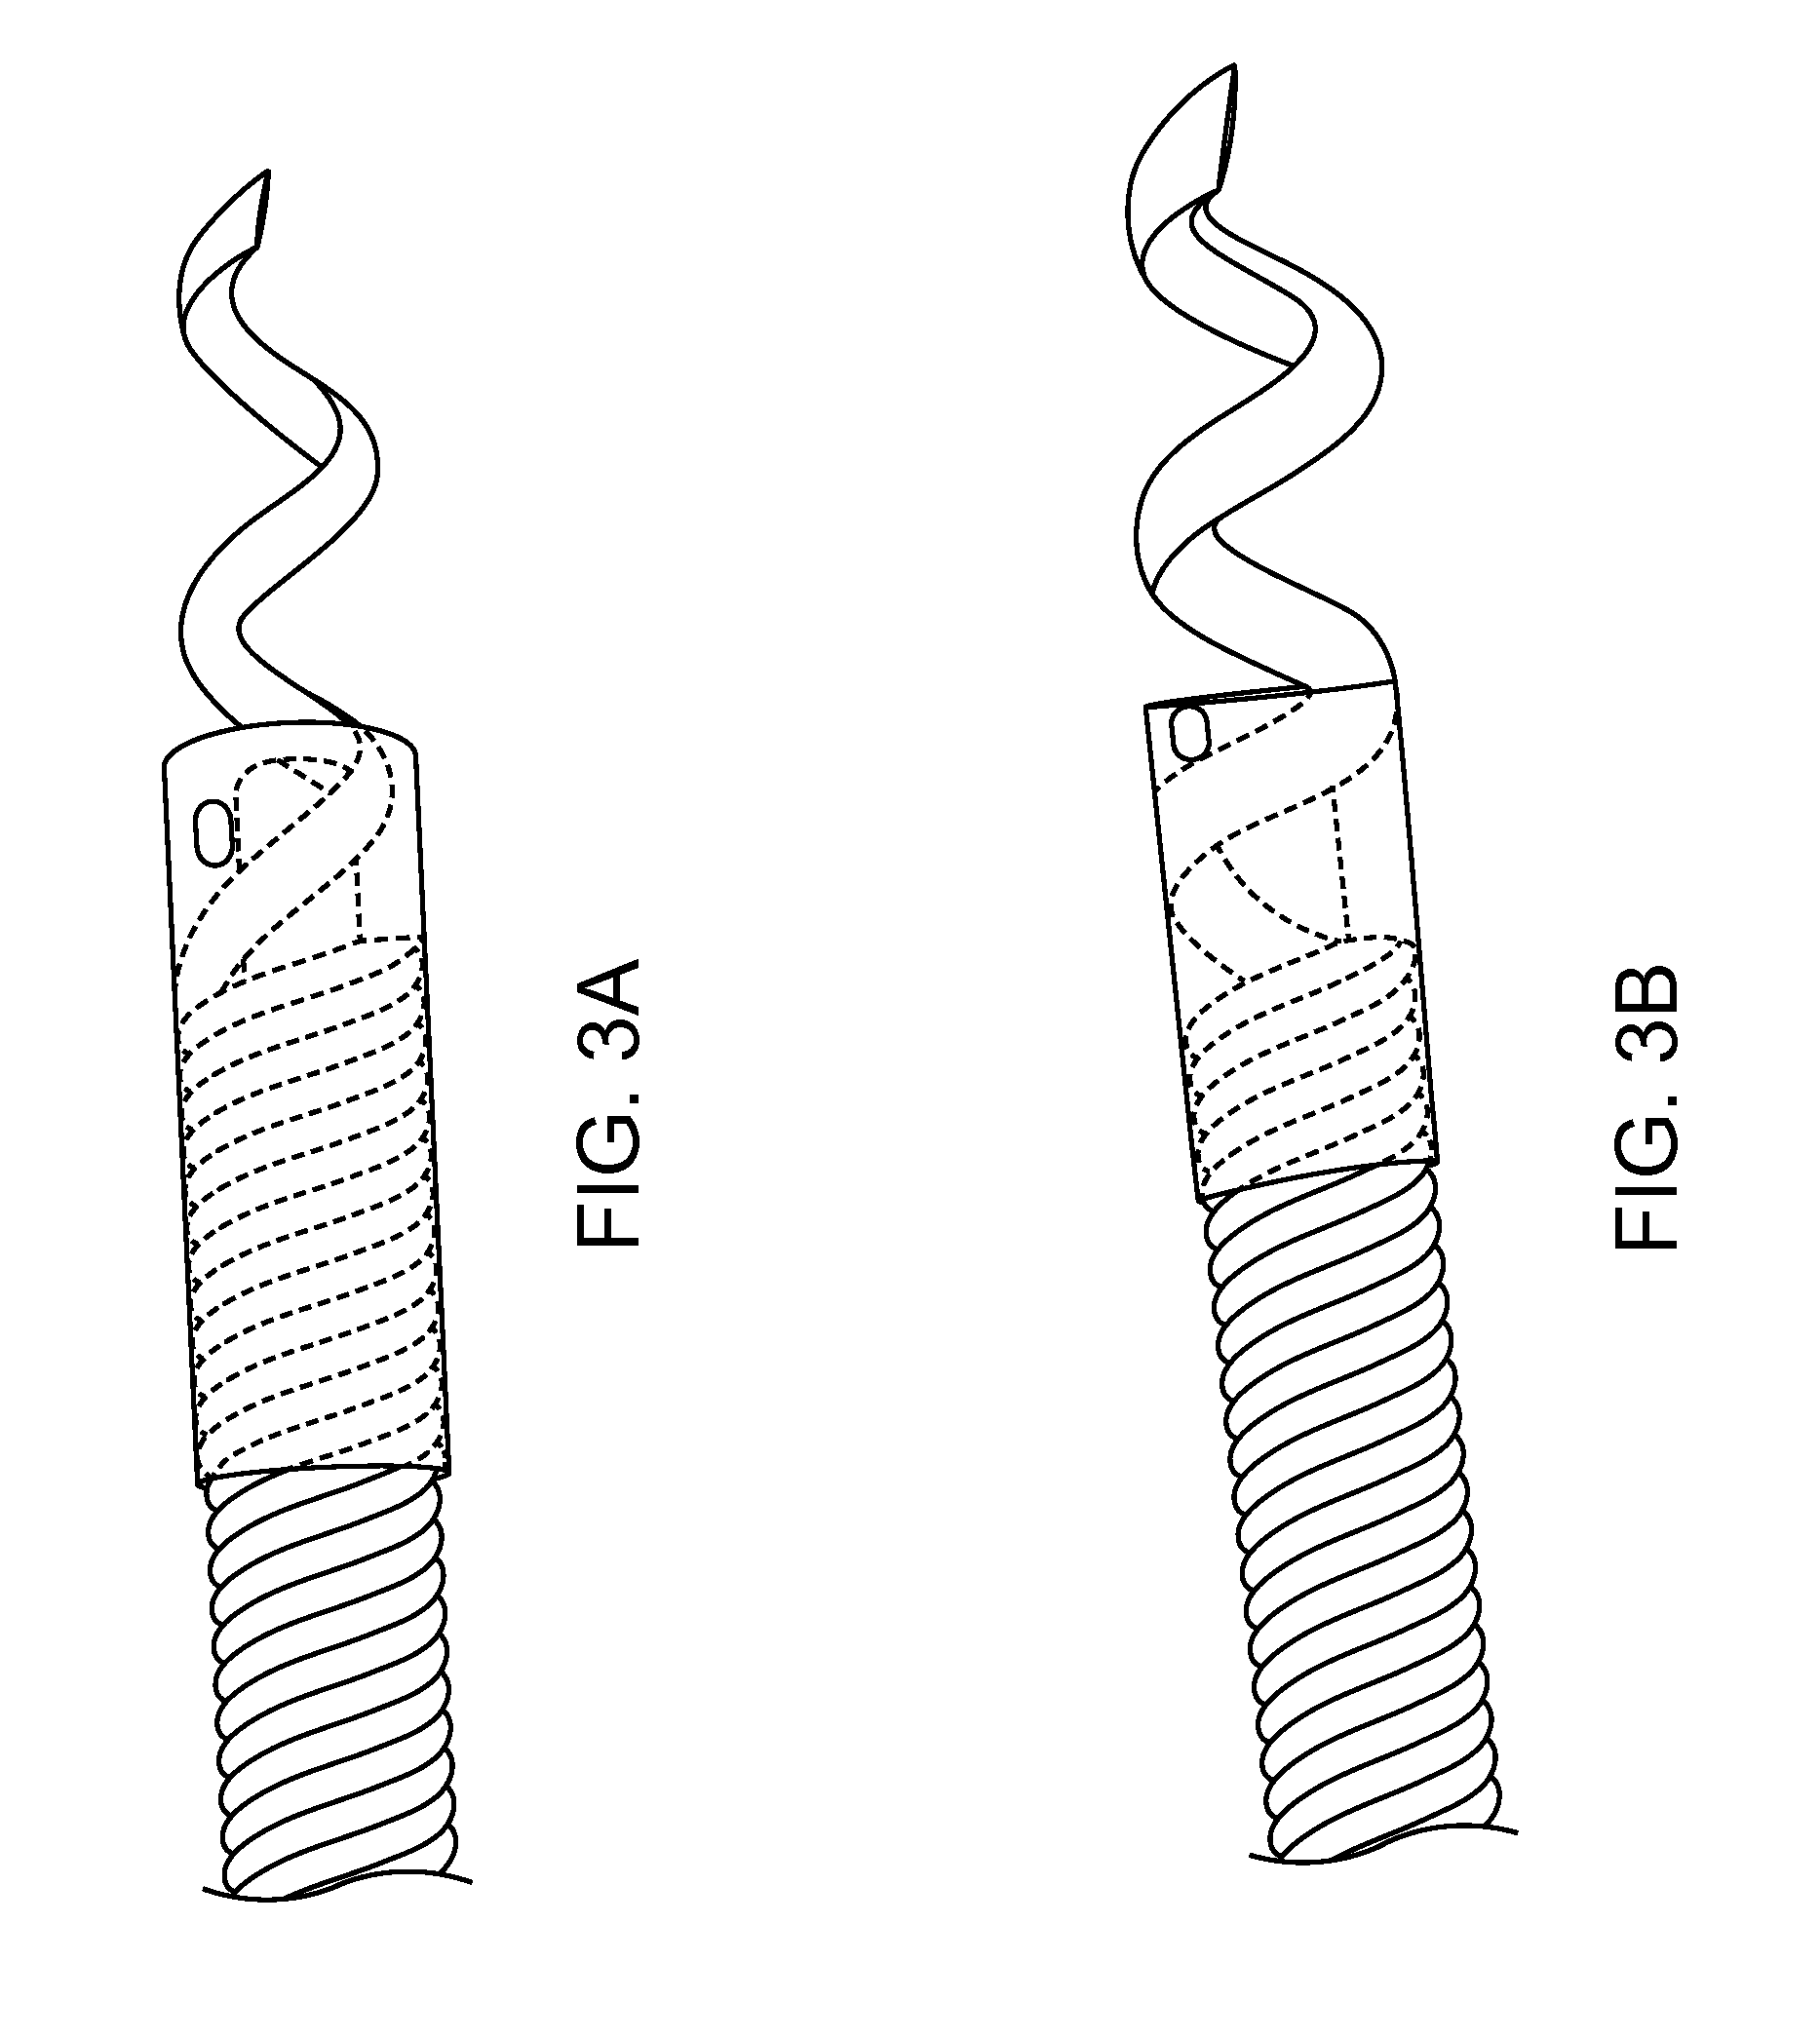 Radial and trans-endocardial delivery catheter